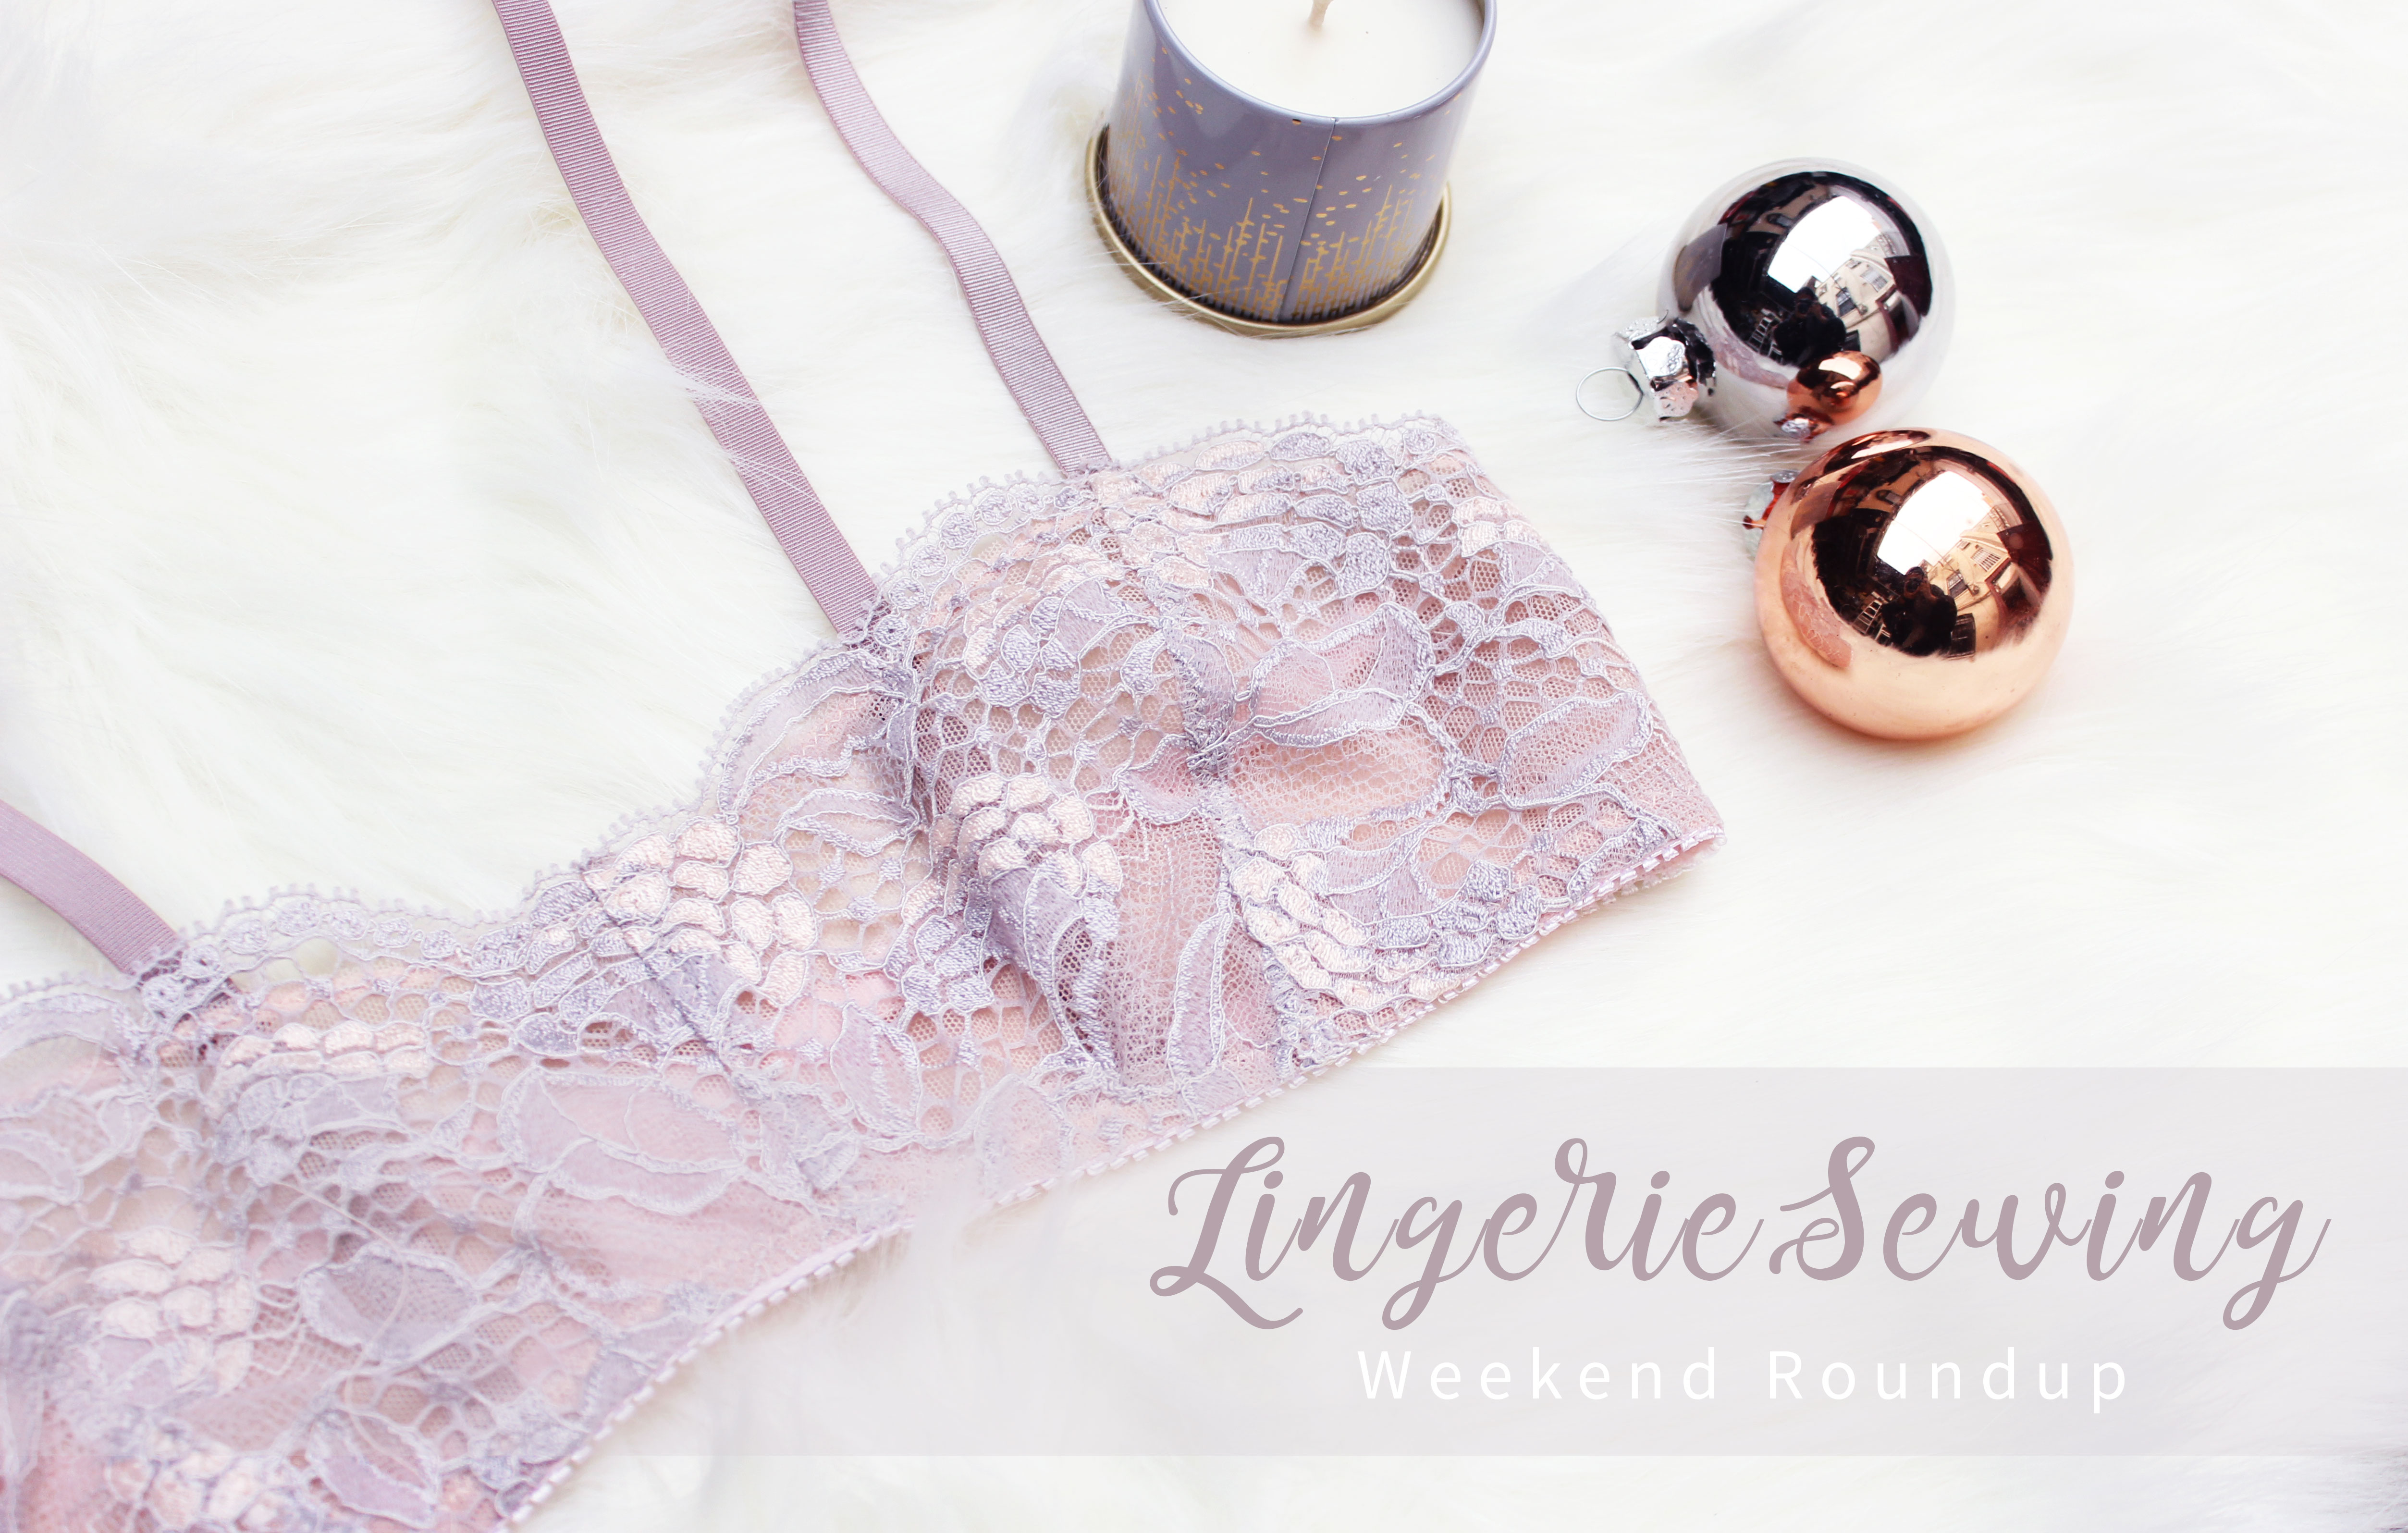 Lingerie Sewing Weekend Round Up